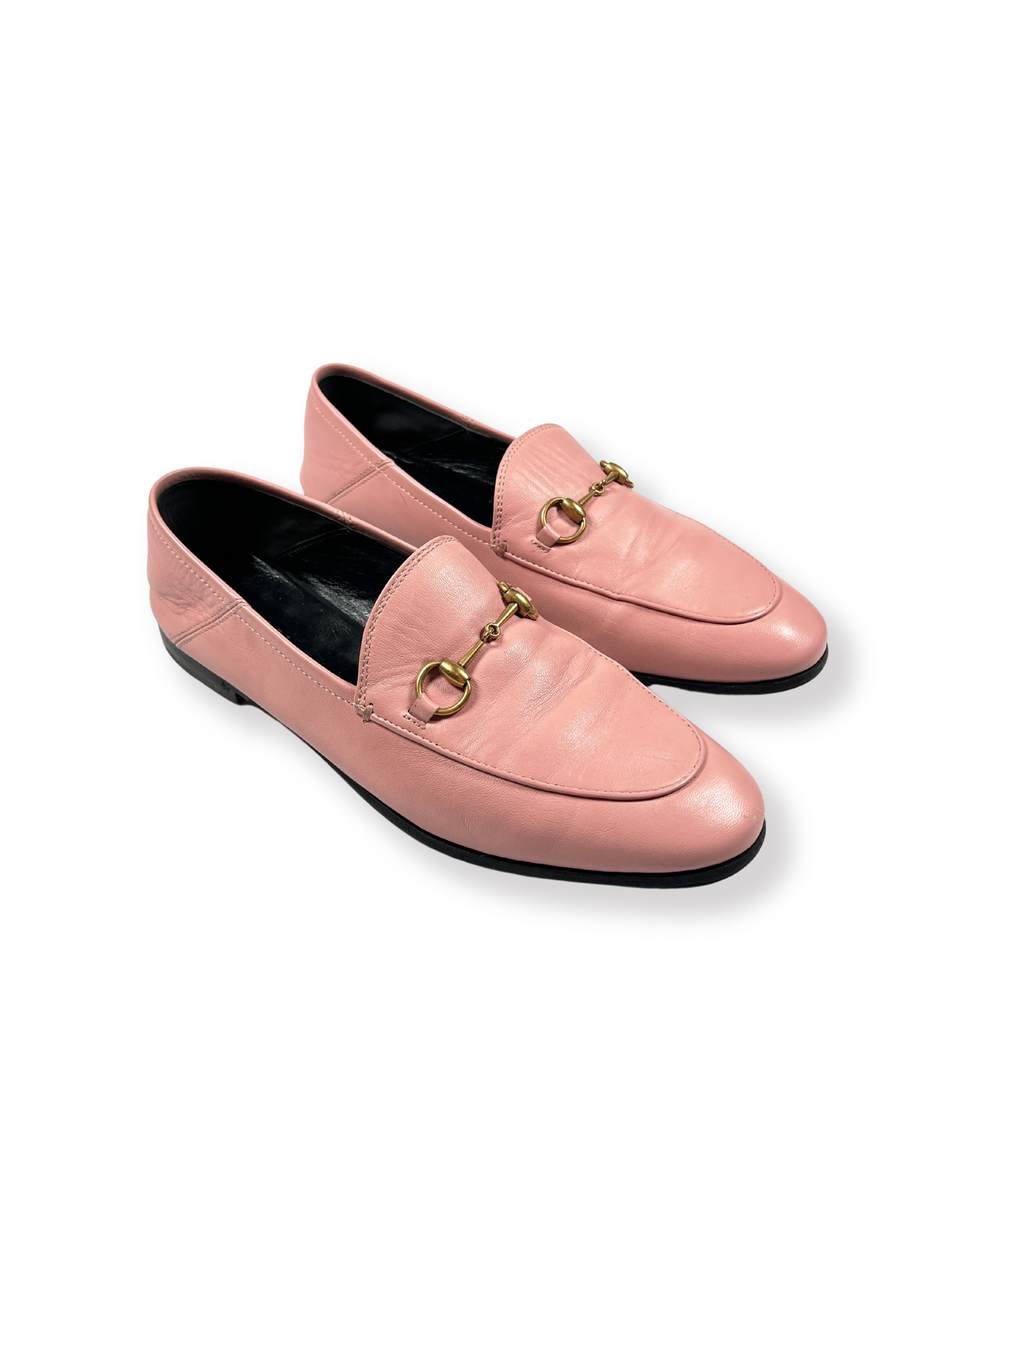 GUCCI - BRIXTON LOAFER IN PINK LEATHER - SZ 38.5